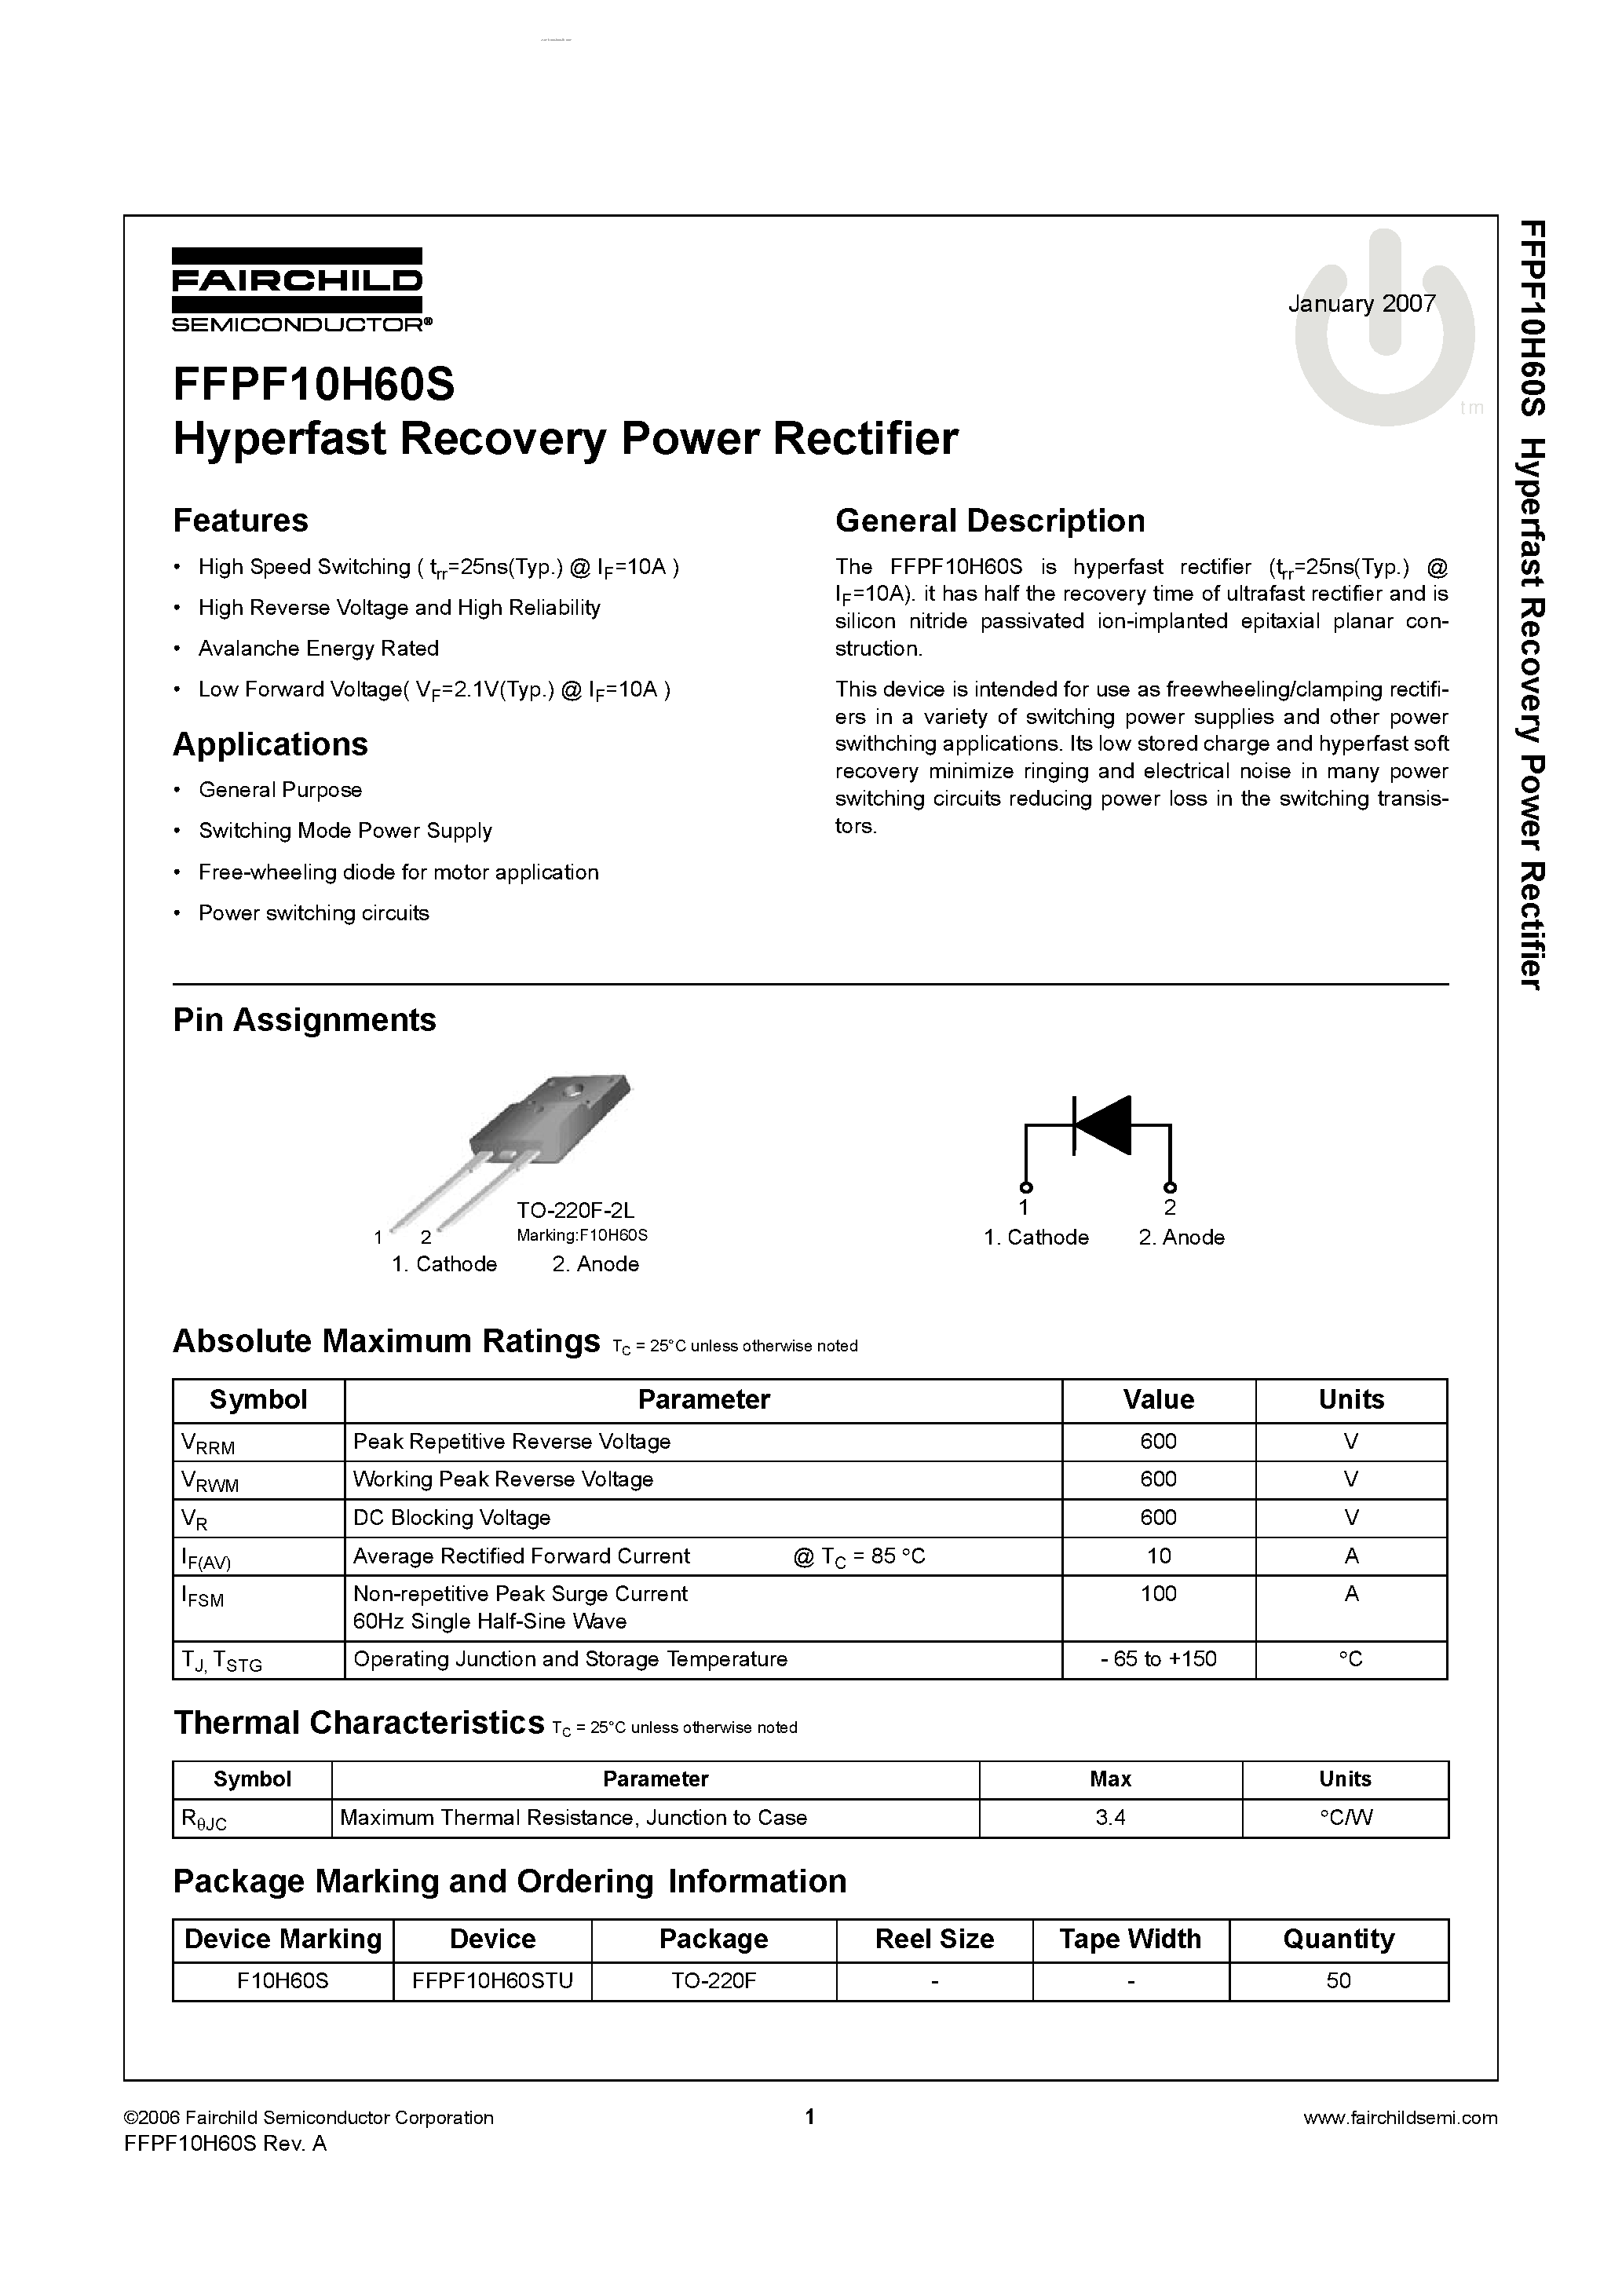 Datasheet FFPF10H60S - Hyperfast Recovery Power Rectifier page 1